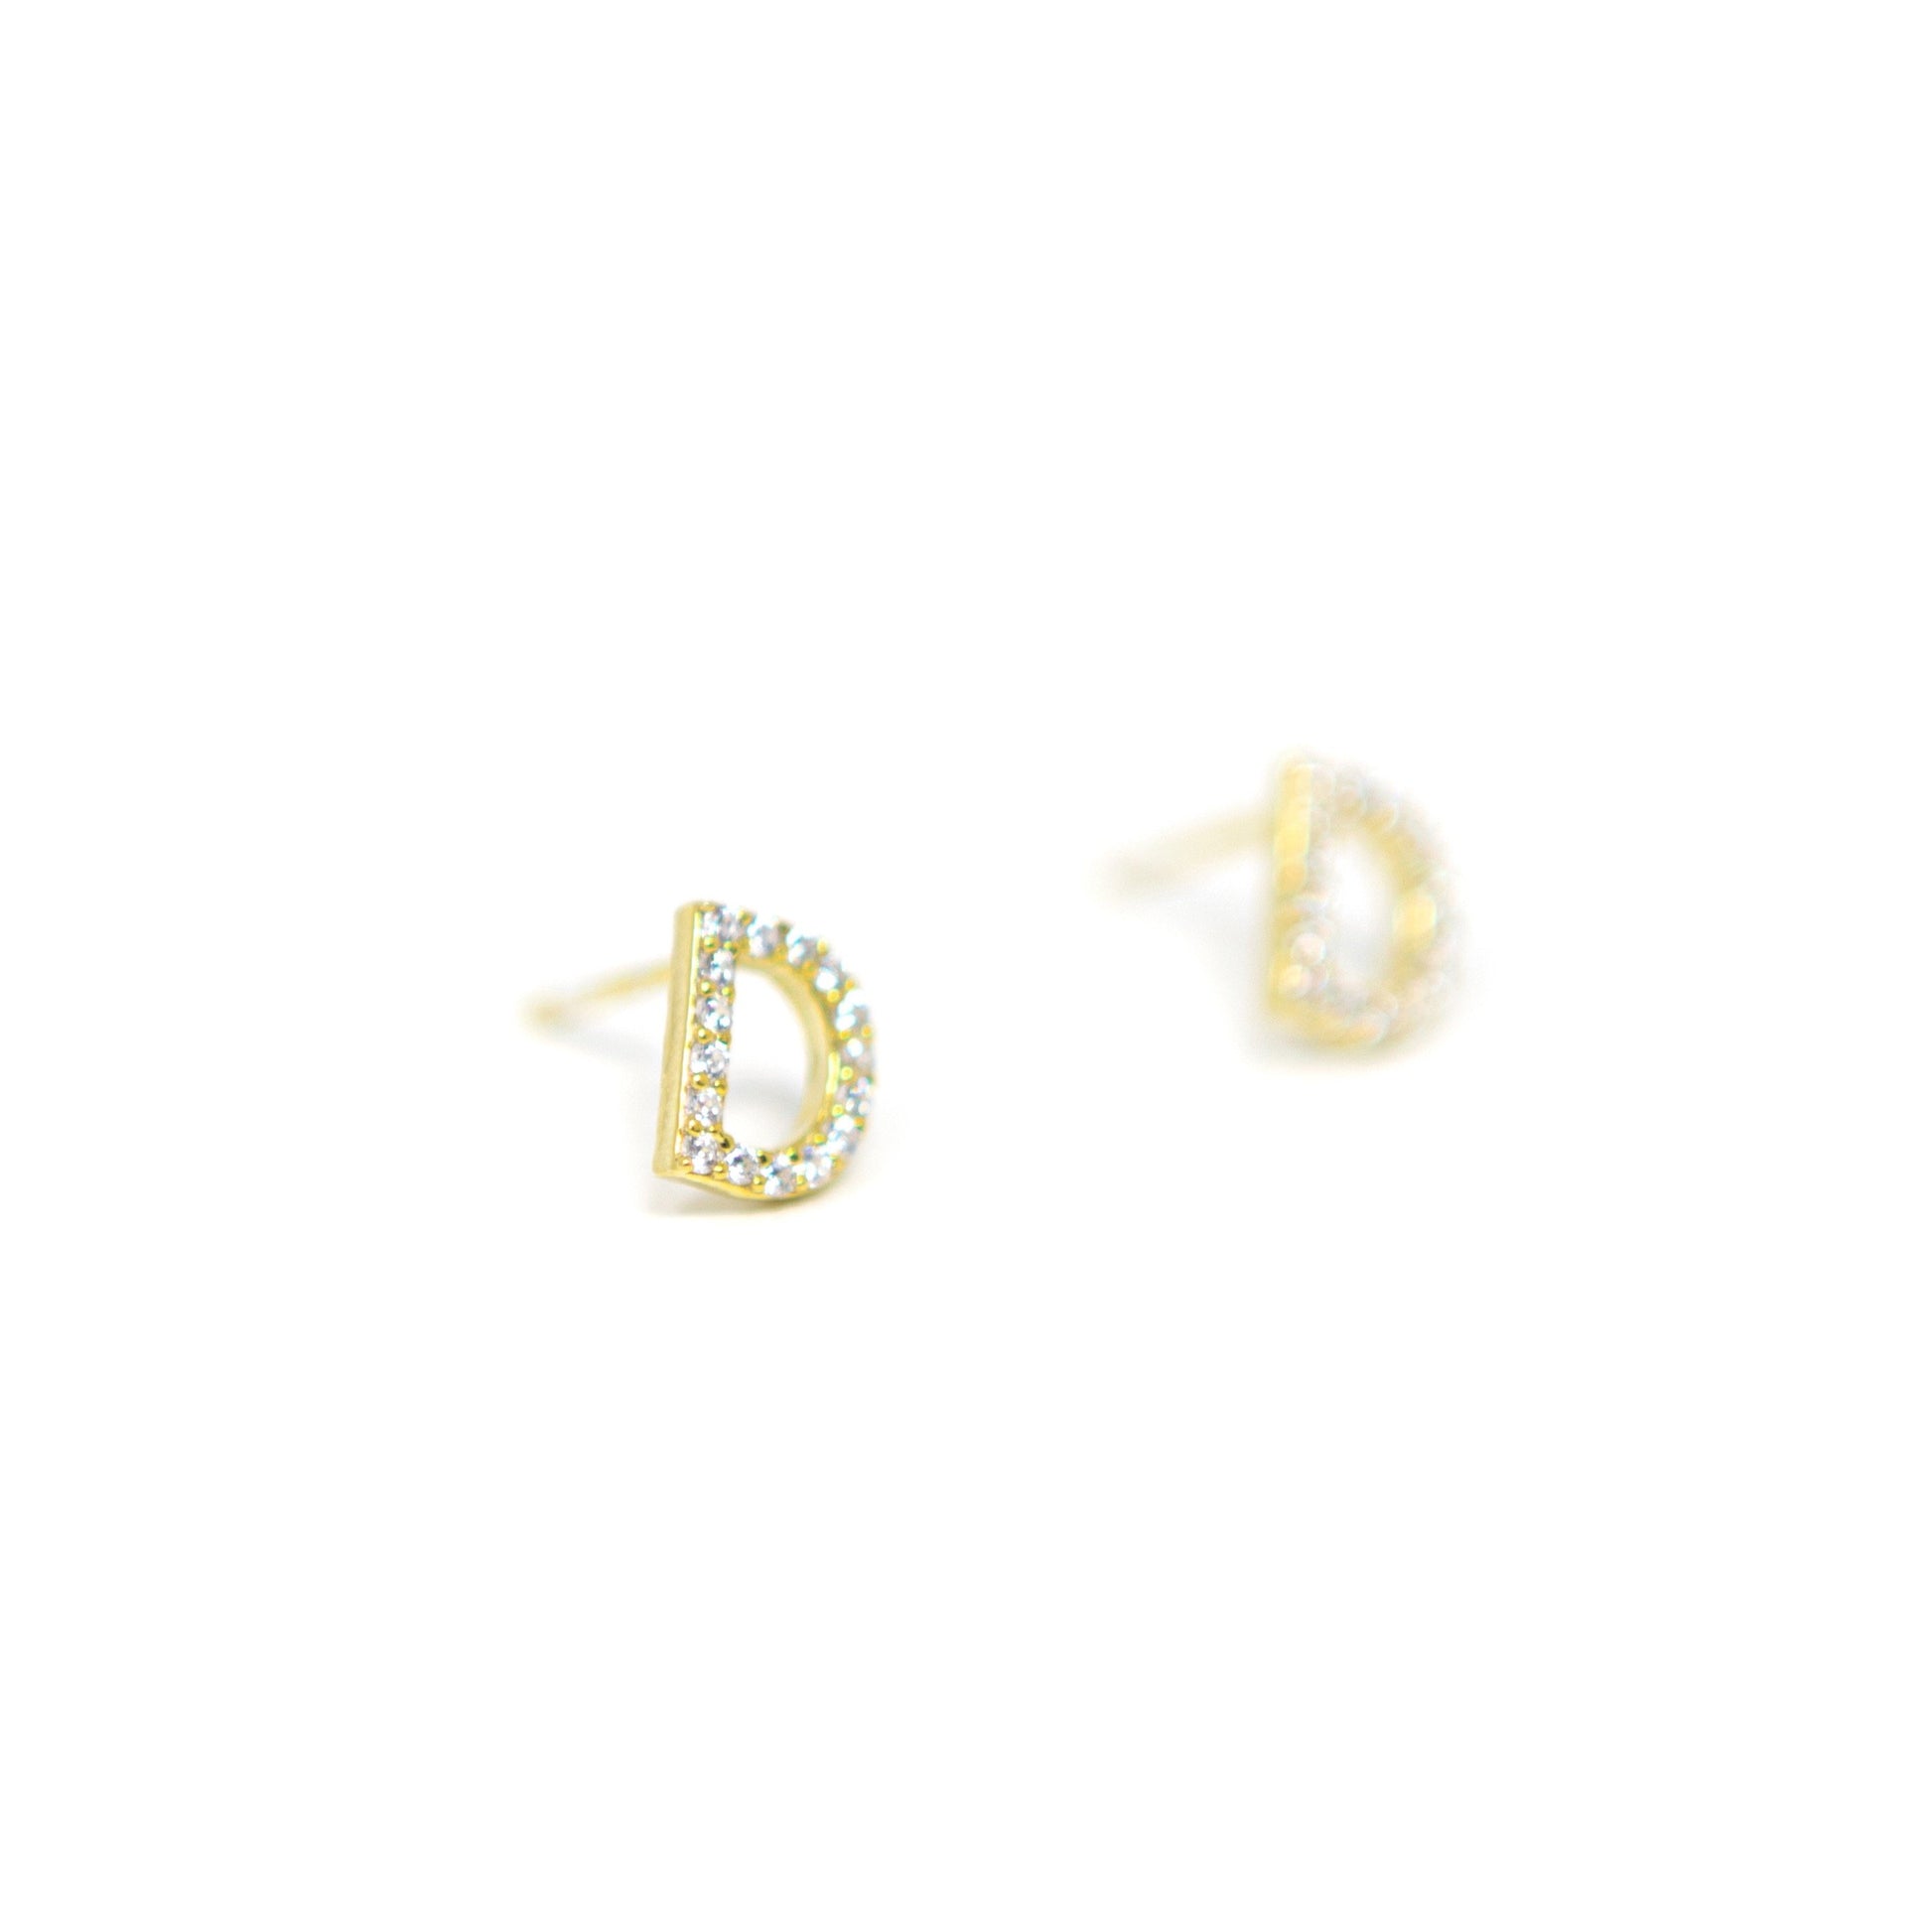 Single Letter Initial Earrings - Sold as Separates JEWELRY The Sis Kiss 